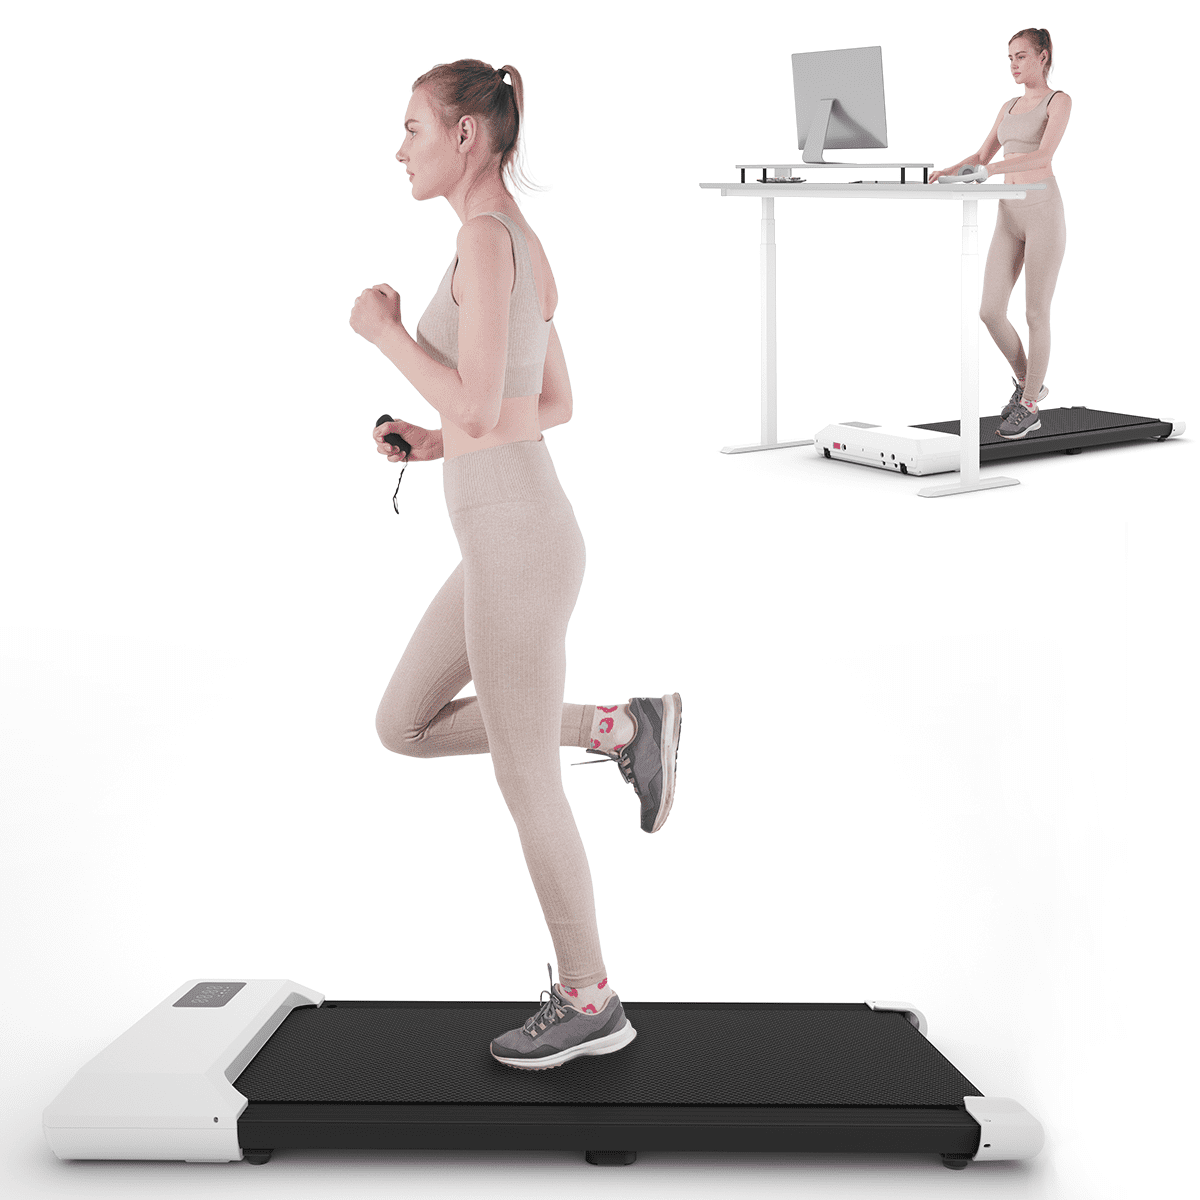 YDZJY 2.5Hp 2-in-1 Under Desk Treadmill with Remote Control and LED Display